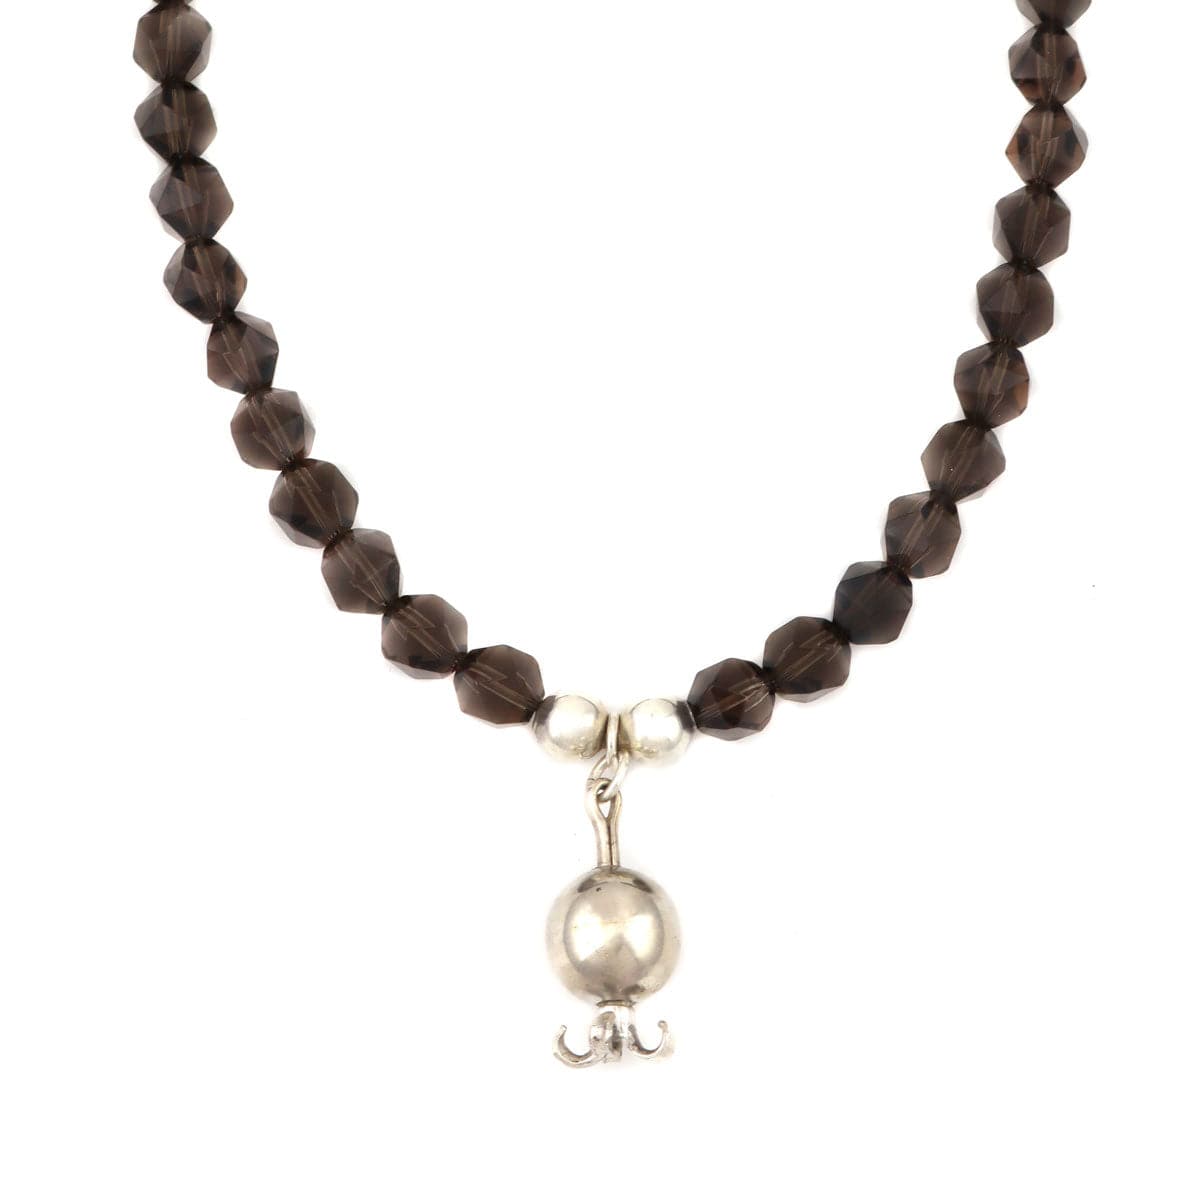 Miramontes - Necklace on Faceted Smoke Quartz Beads and Silver Pomegranate, 16" Length (J91305-1221-022)1